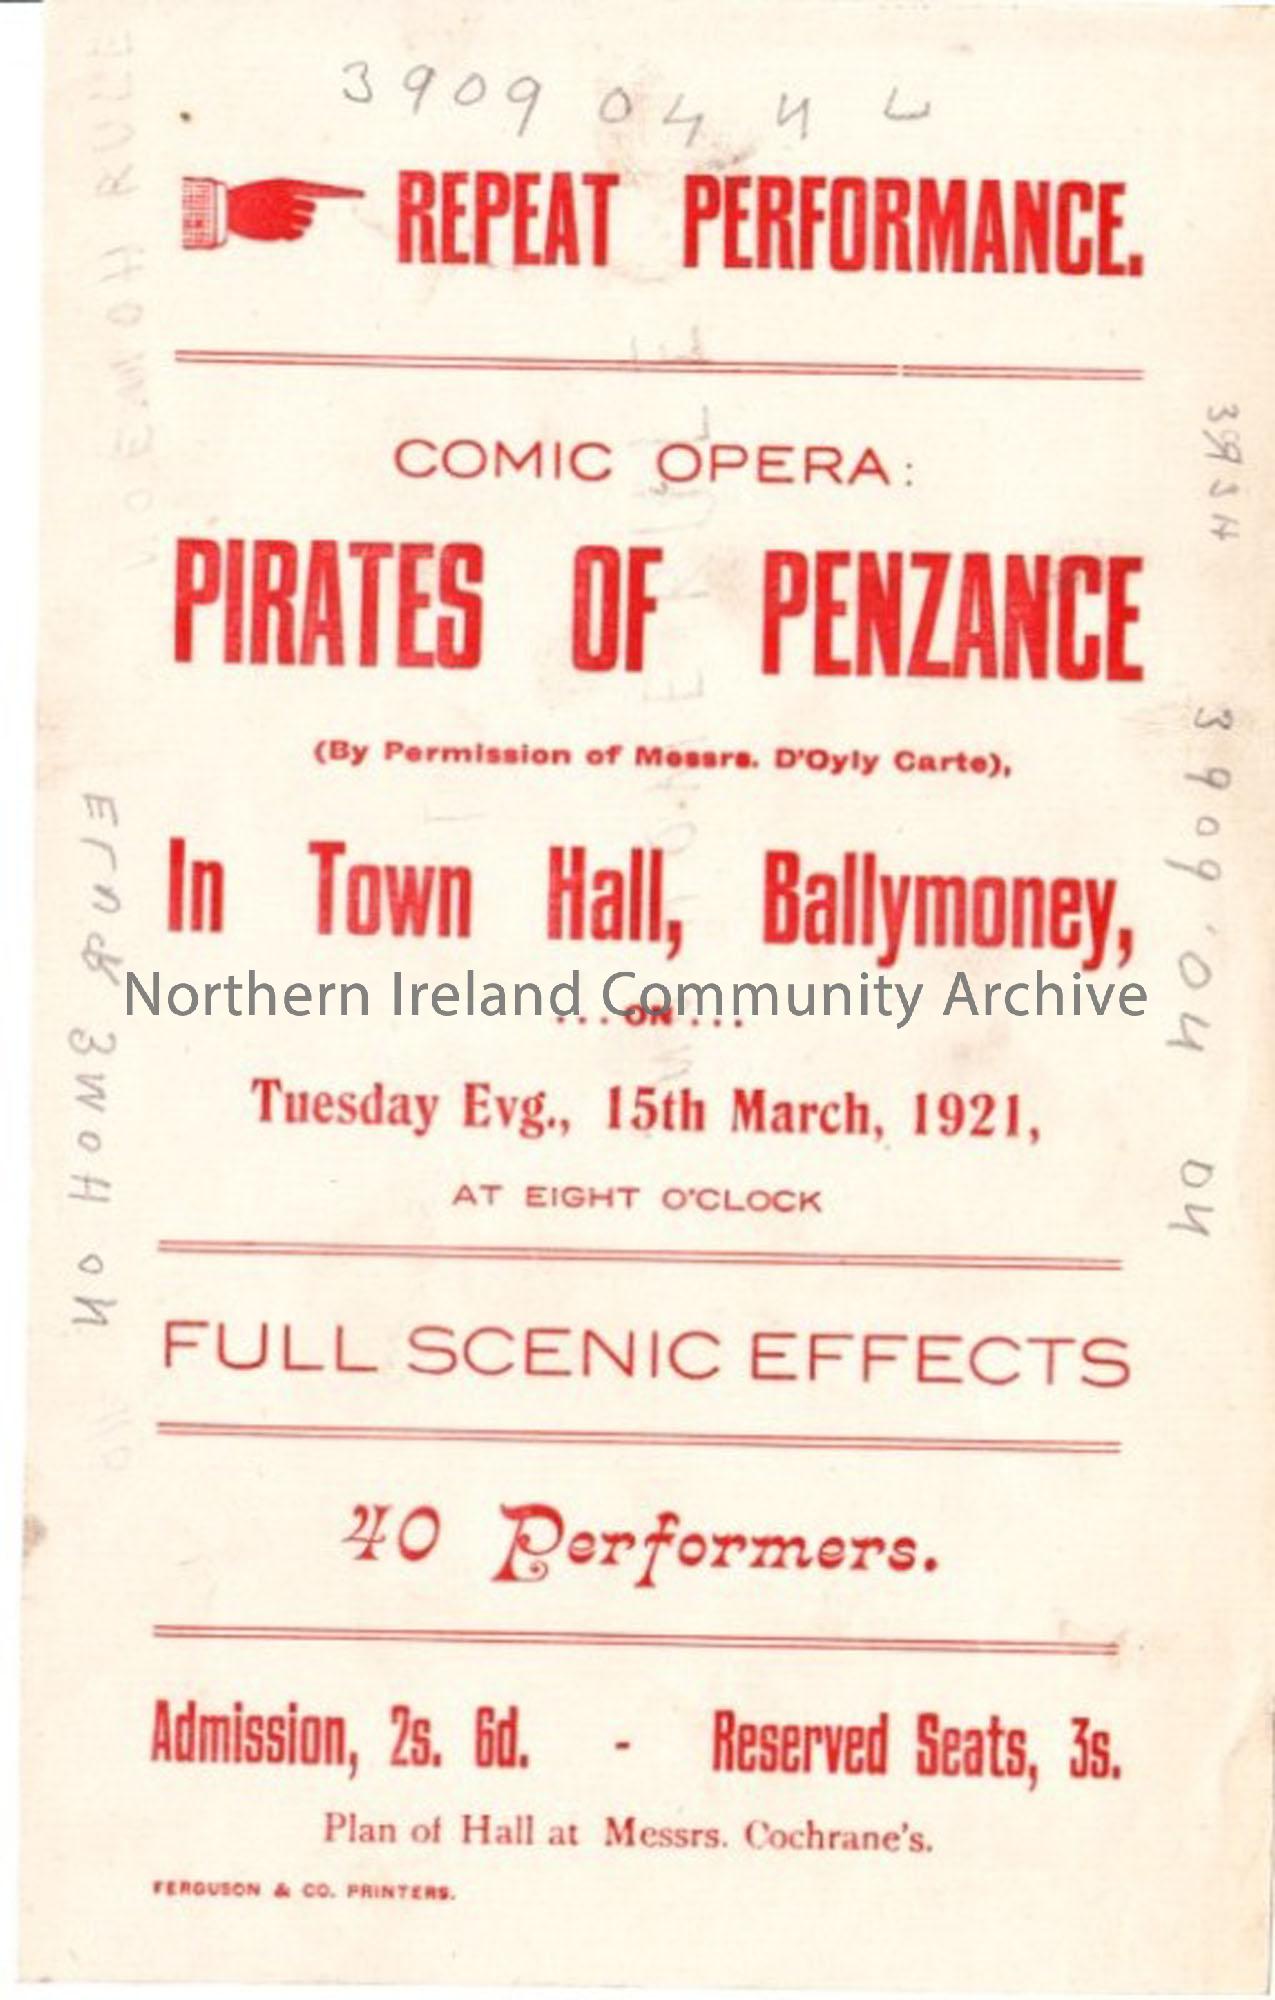 Repeat performance comic opera ‘Pirates of Penzance’ in Town Hall, Ballymoney on Tuesday 15th March, 1921.